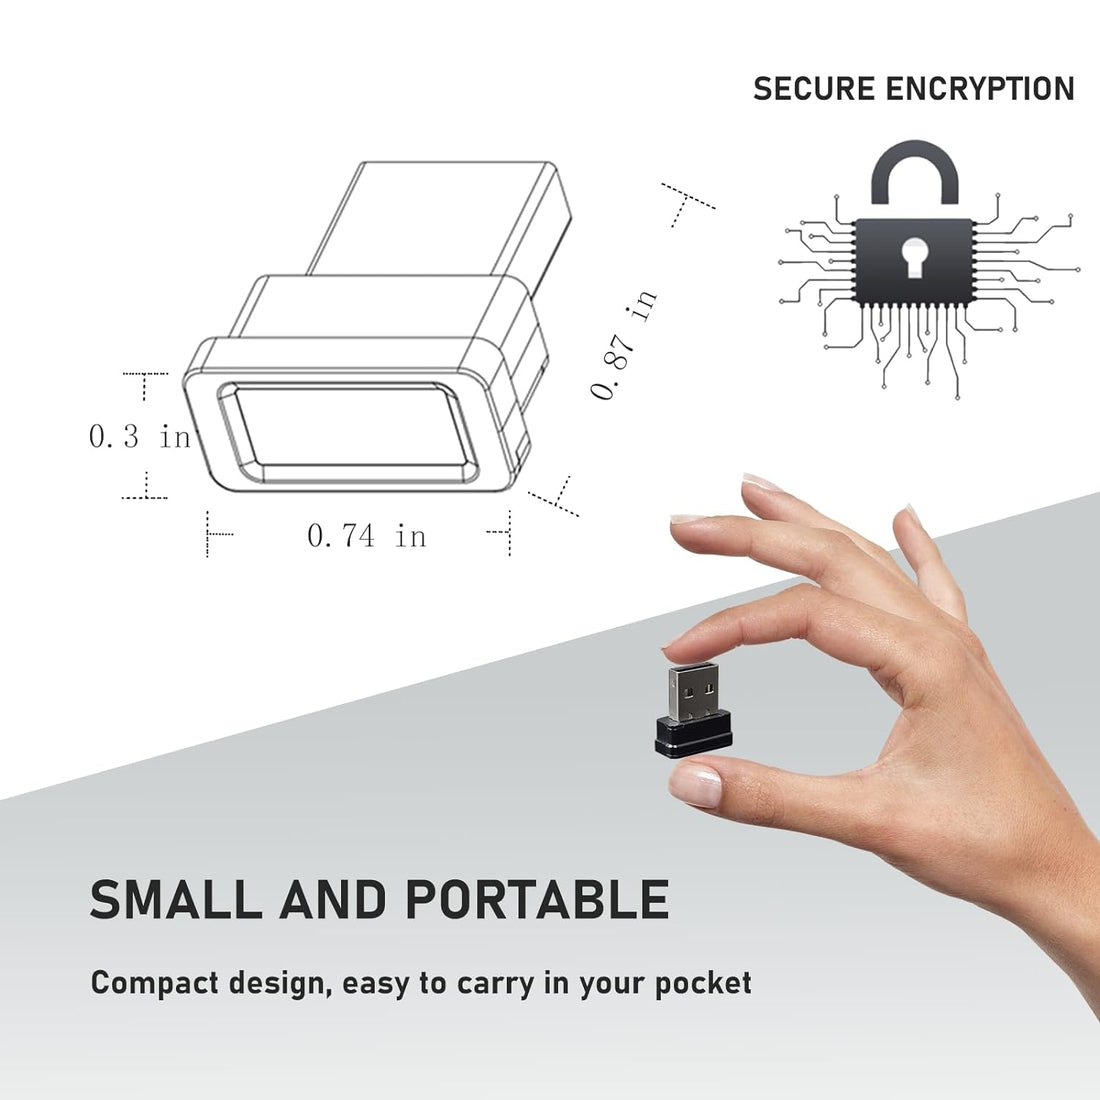 Mini USB Fingerprint Reader, CCKHDD Fingerprint Scanner Support Windows 10&11 with 360° Touch Biometric Latest Windows Hello Features for Password-Free Login and File Encryption